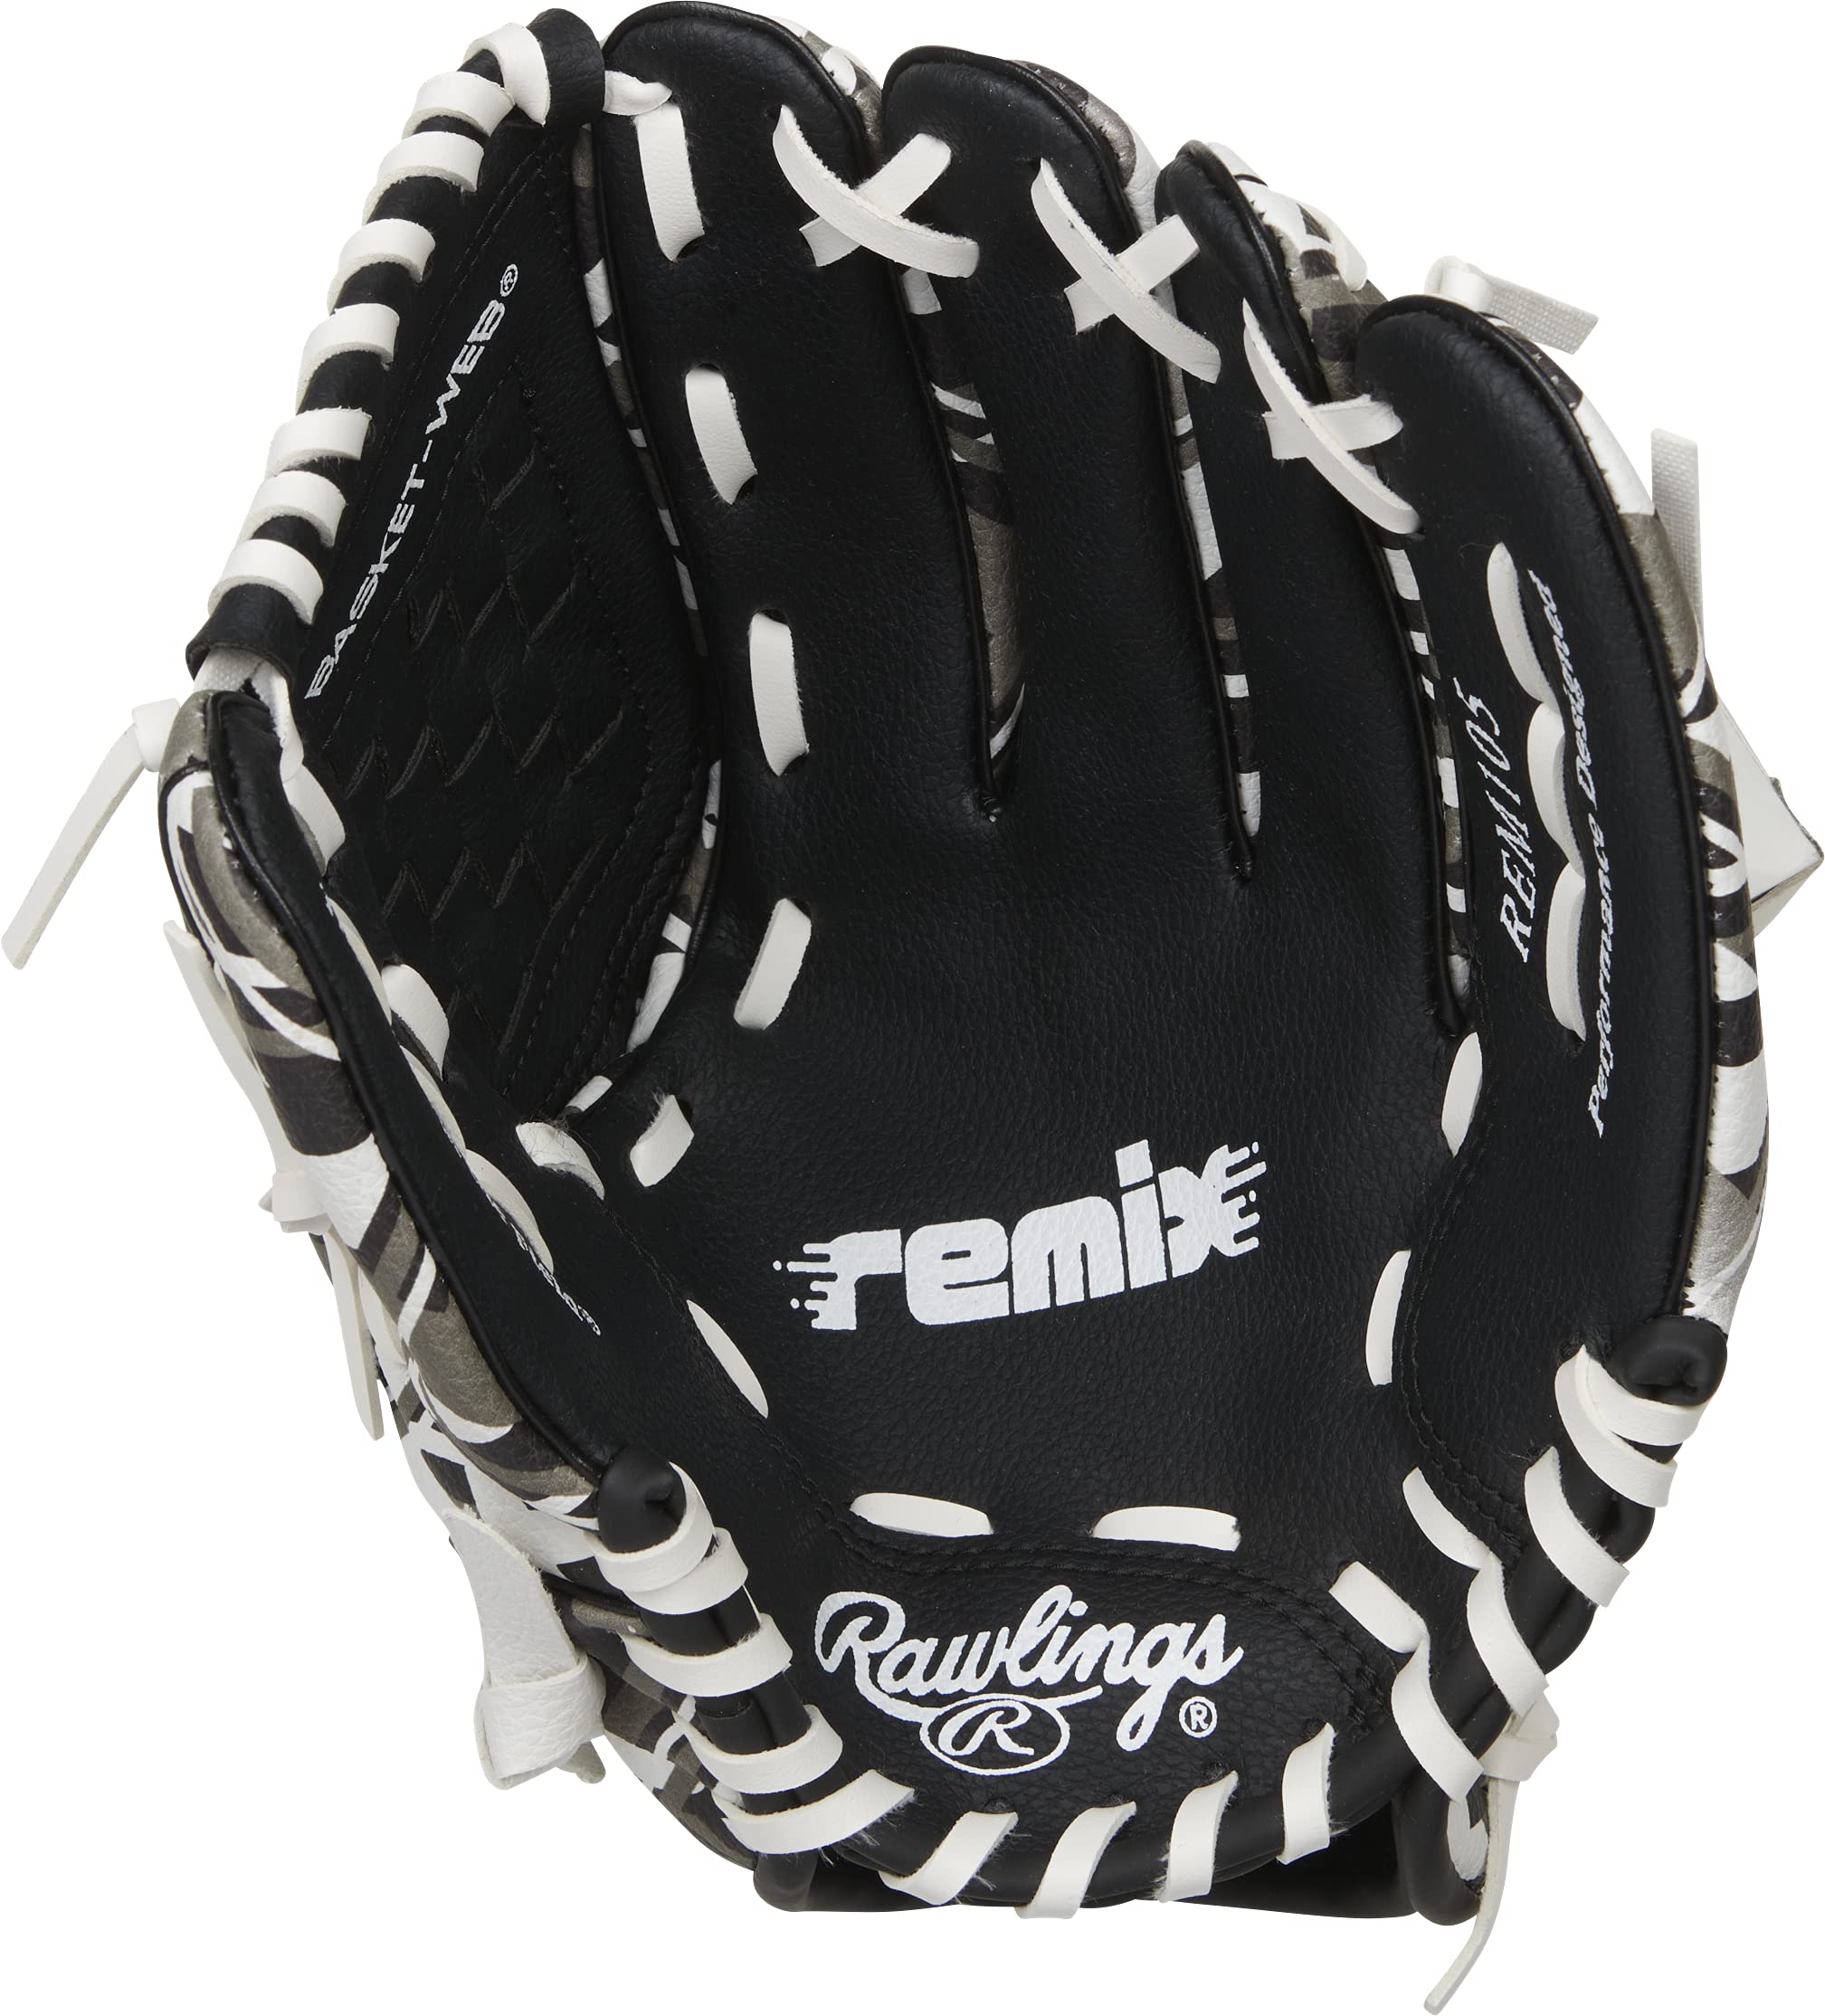 Rawlings Remix Glove Series | T-Ball & Youth Baseball Gloves | Right Hand Throw | 10.5" | Black